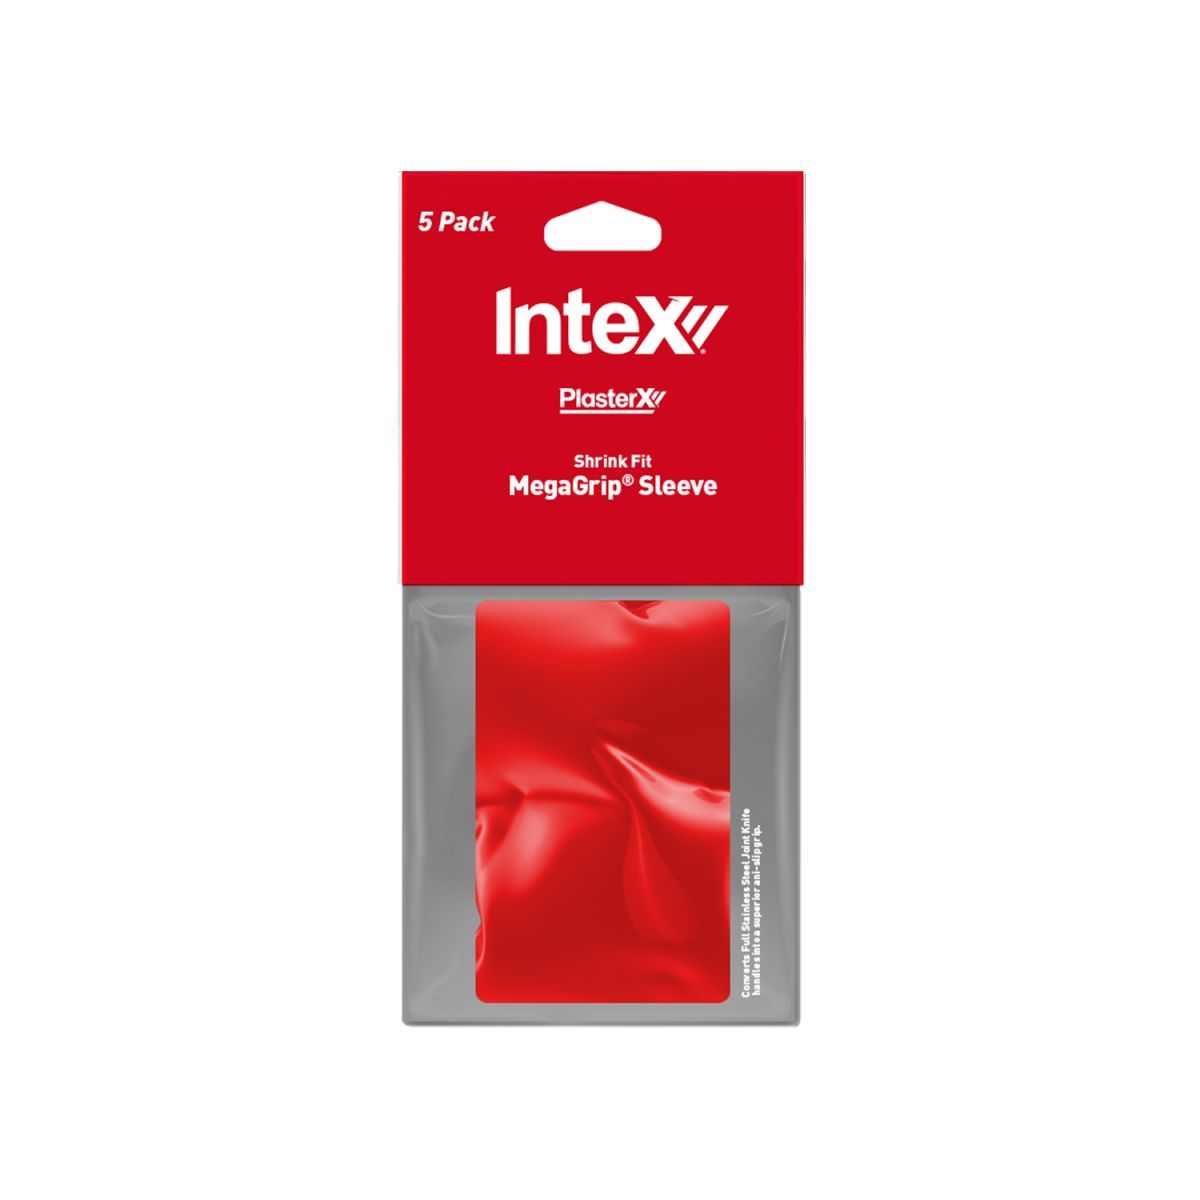 Intex PlasterX Shrink Fit MegaGrip® Sleeve (Suits Full Stainless Steel Joint Knives)
